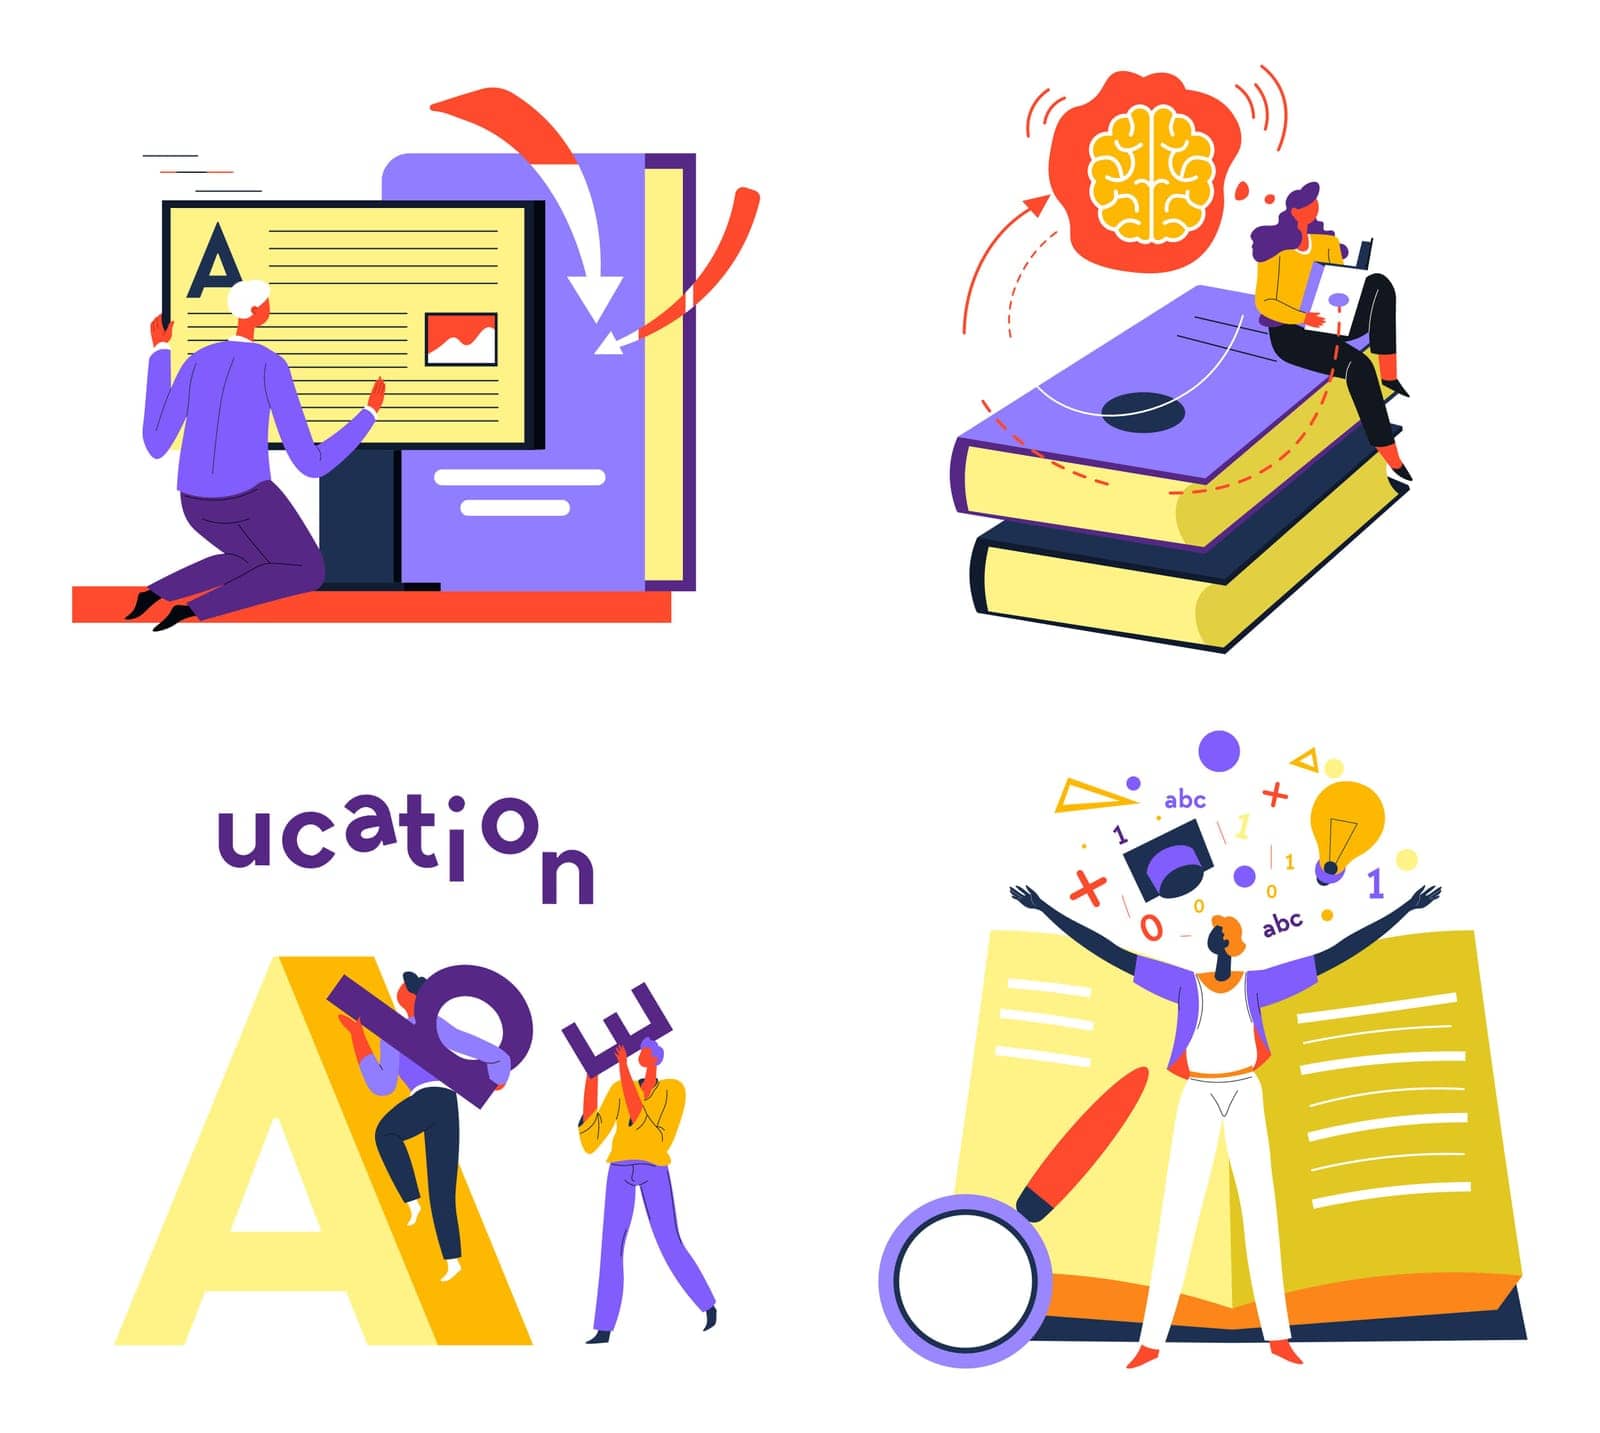 Improvement of skills and development, education and getting knowledge. Using books and publications, online resources and gadgets to complete homework and assignment from school. Vector in flat style